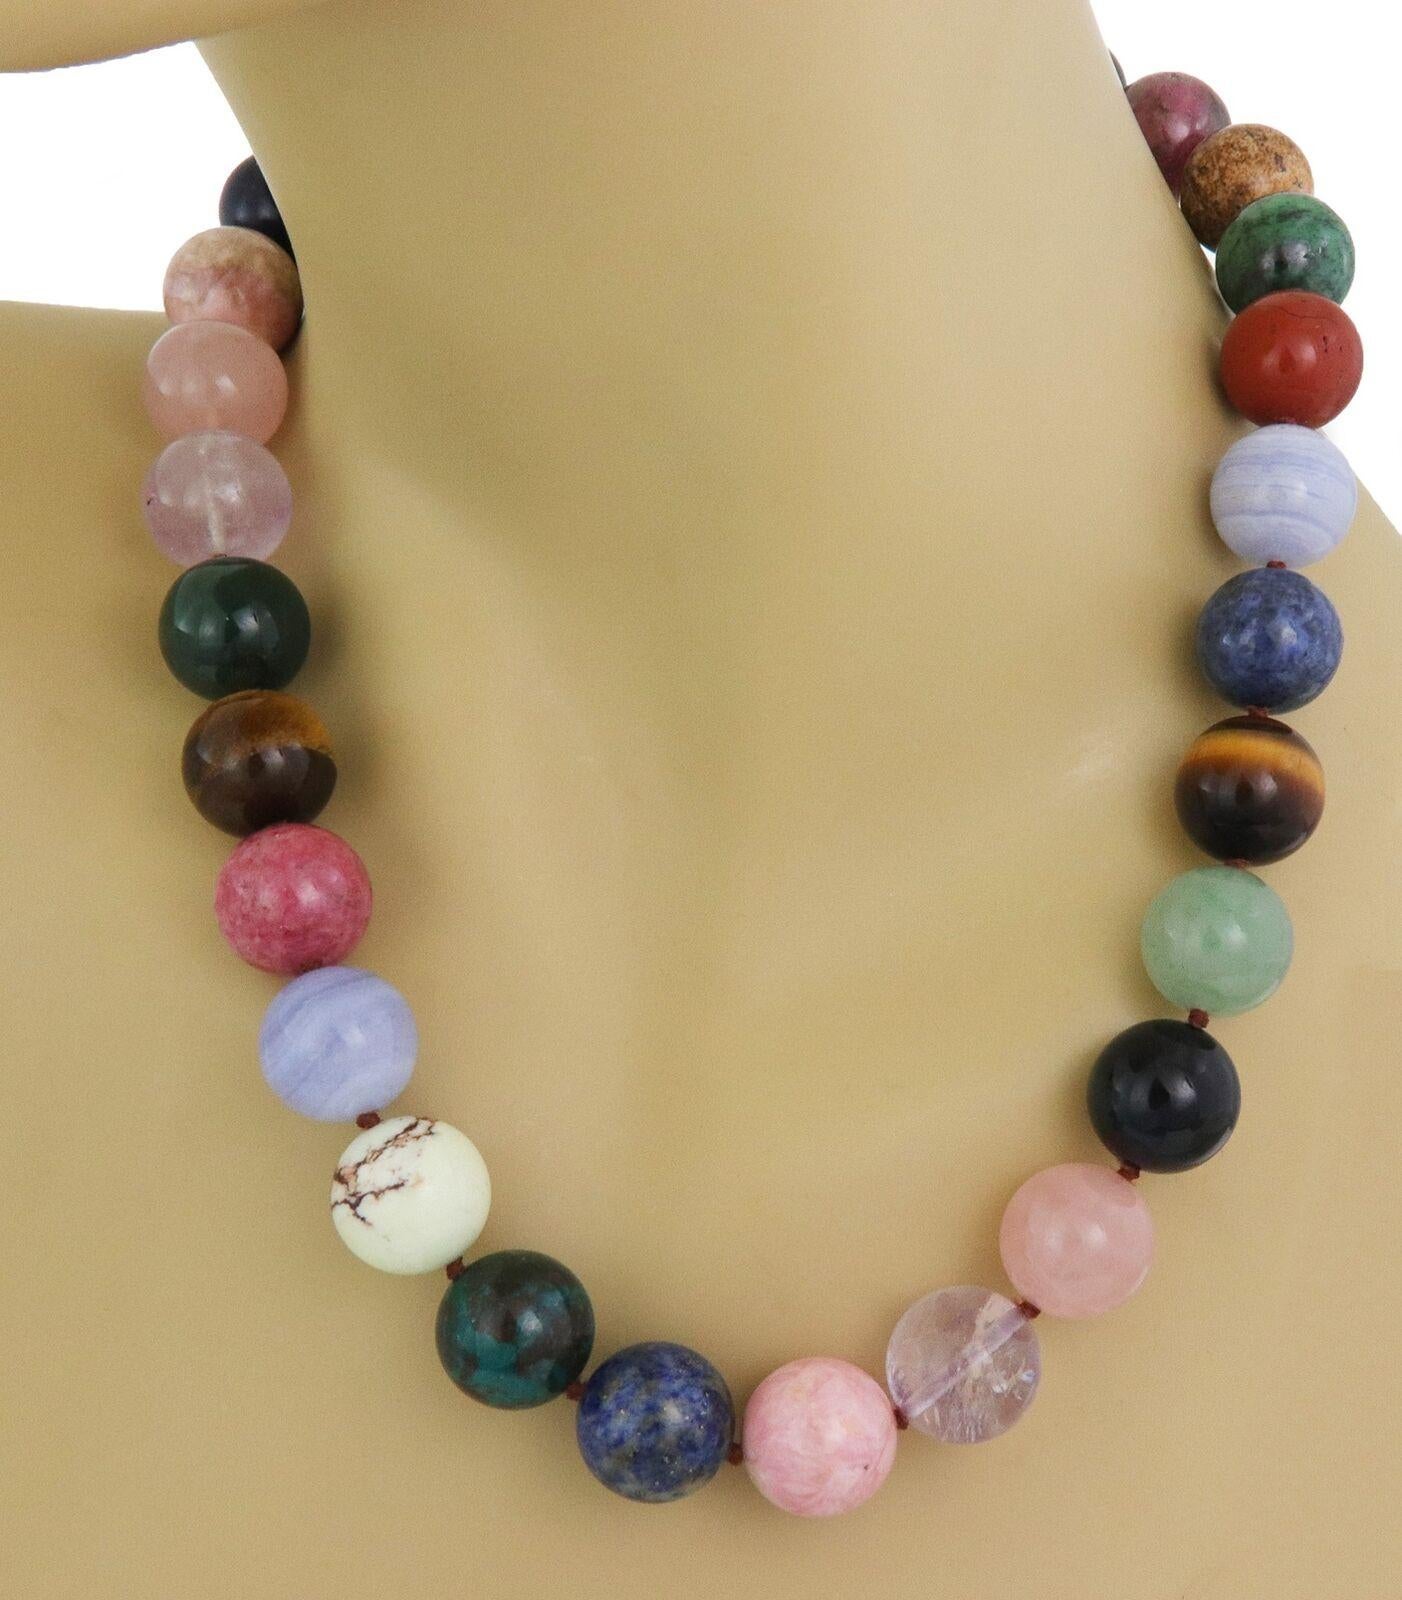 Tiffany & Co. Multicolor Gemstone Sterling Silver Beaded Necklace